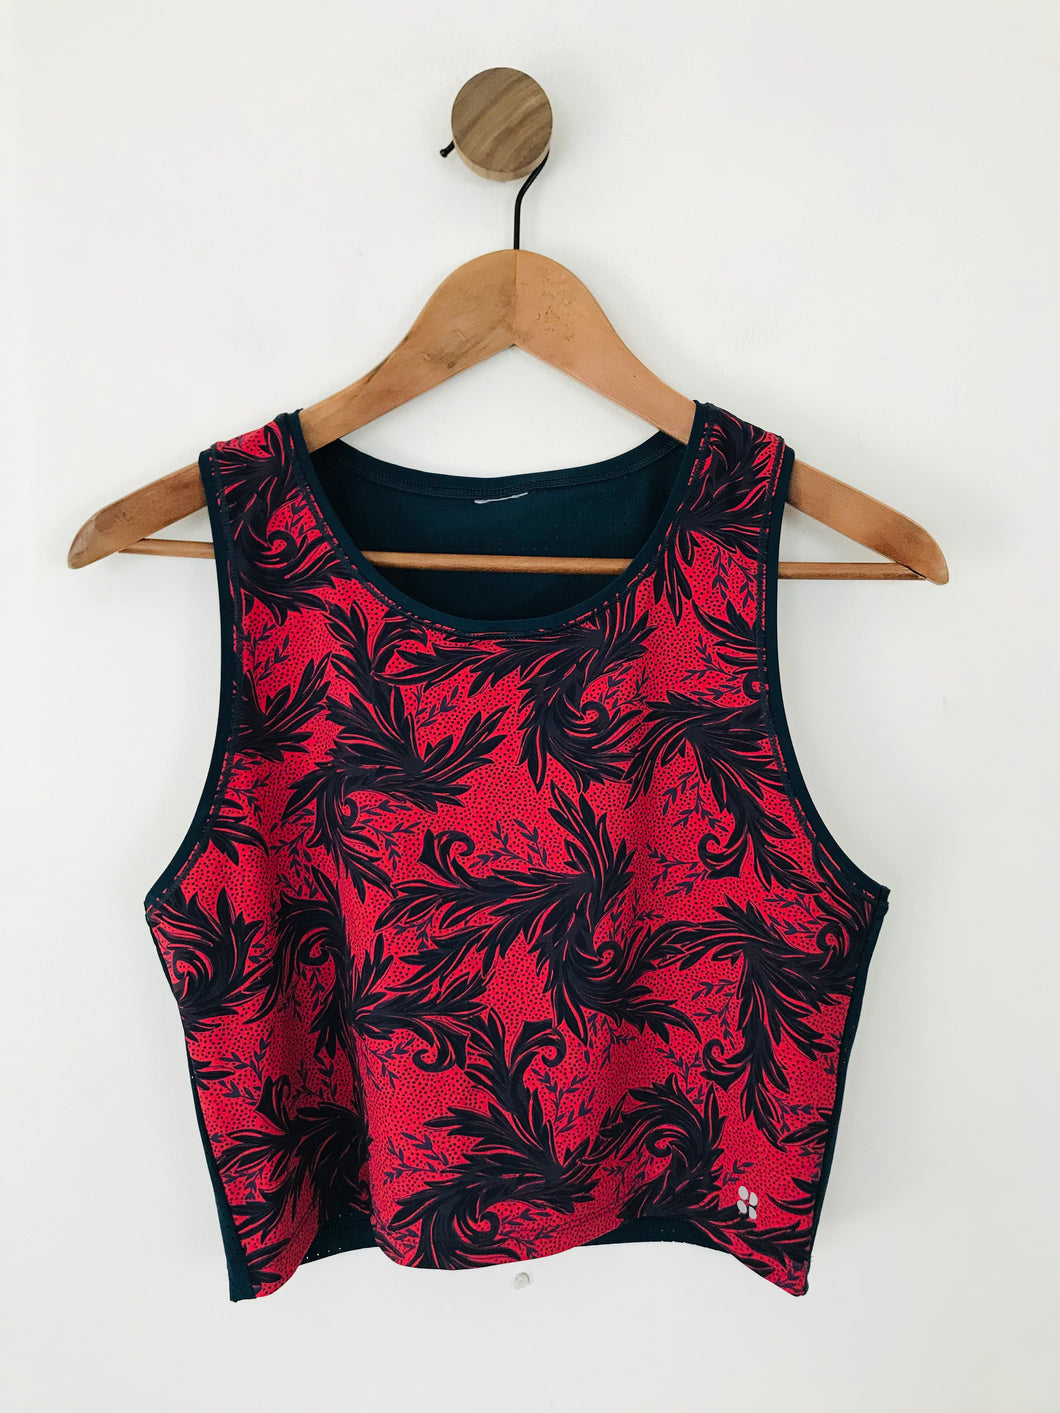 Sweaty Betty Women's Floral Cropped Gym Sports Top | L UK14 | Red